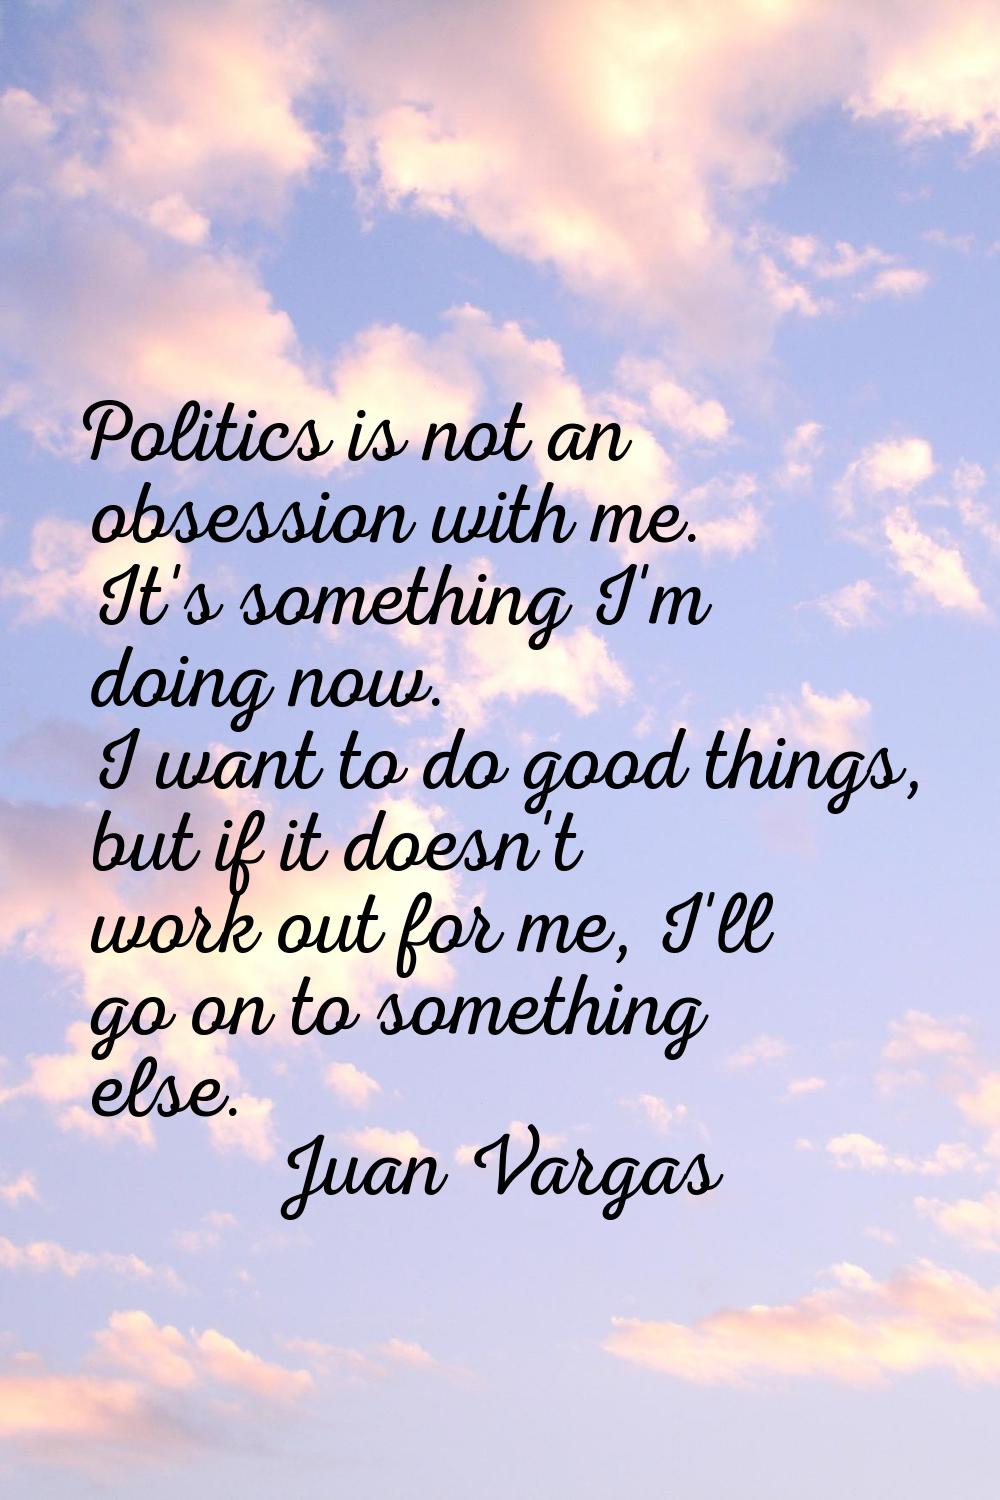 Politics is not an obsession with me. It's something I'm doing now. I want to do good things, but i